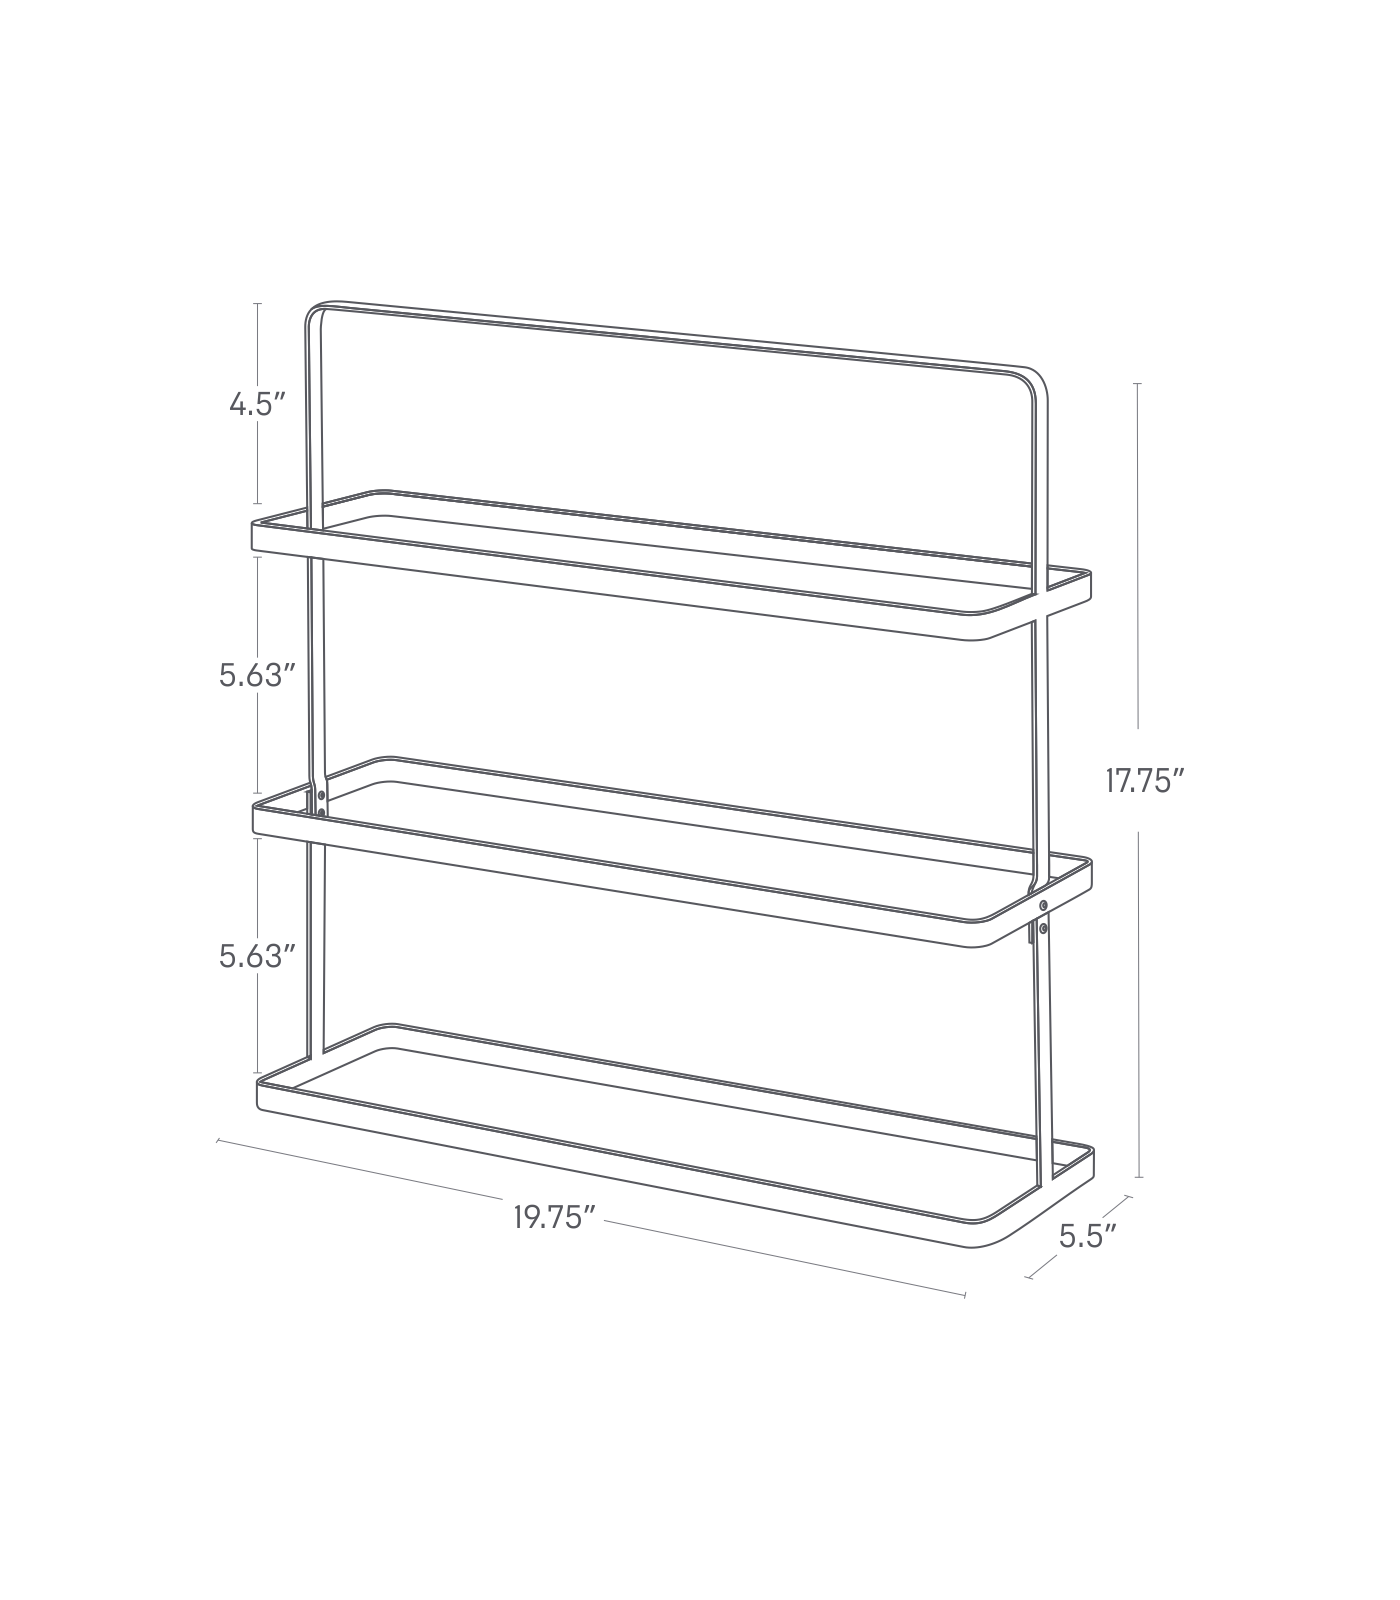 TOWER Shoe Rack. Size: Short. 17.75 inches tall, 19.75 inches long, 5.5 inches wide. Handle 4.5 inches tall, tiers 5.63 inches apart.